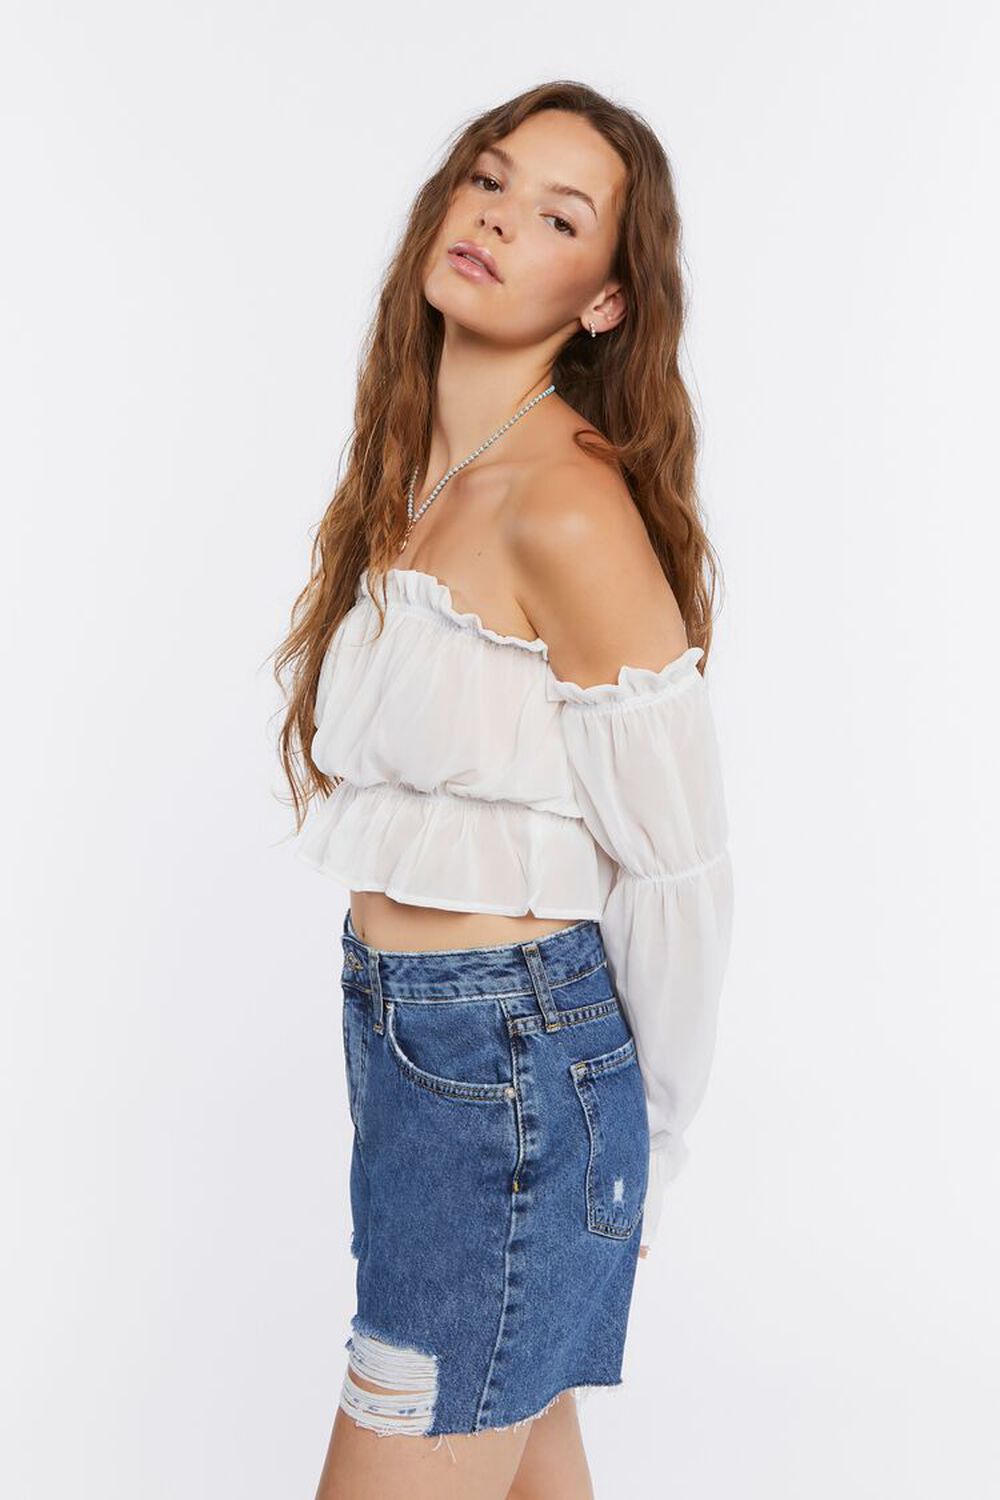 IVORY Ruffle Off-the-Shoulder Crop Top, image 2